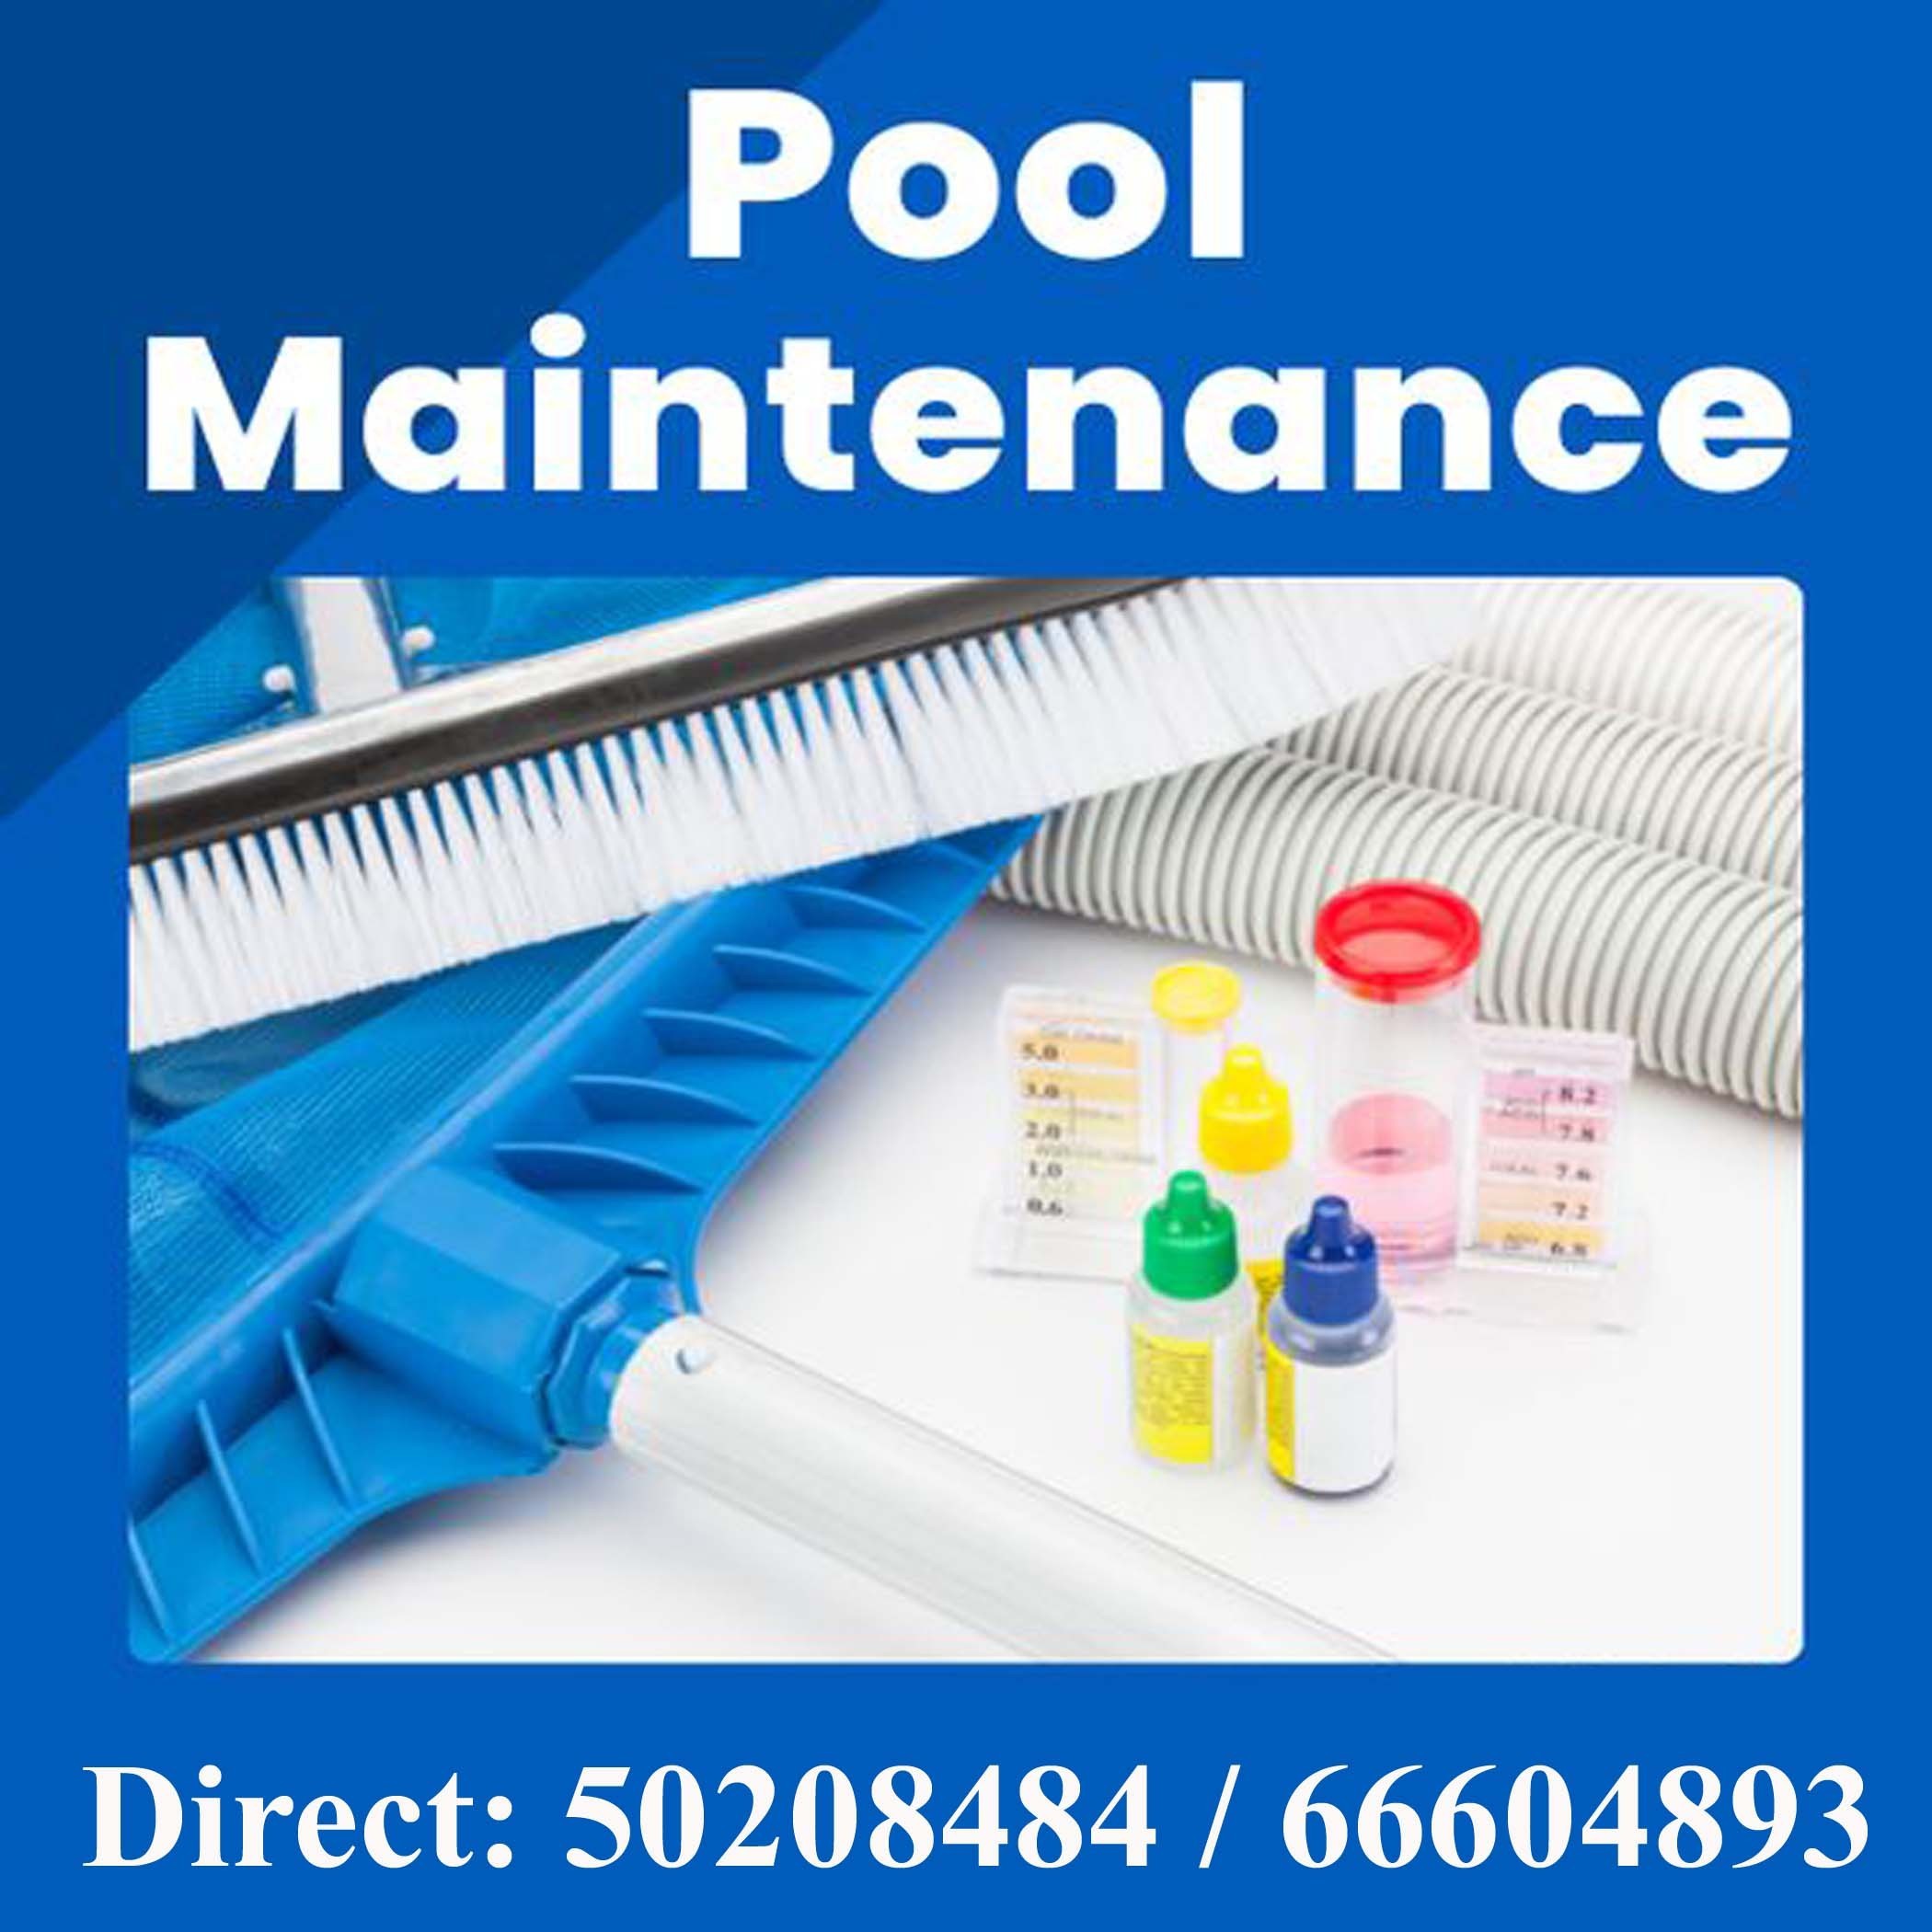 Servicing the swimming pools of Kuwait